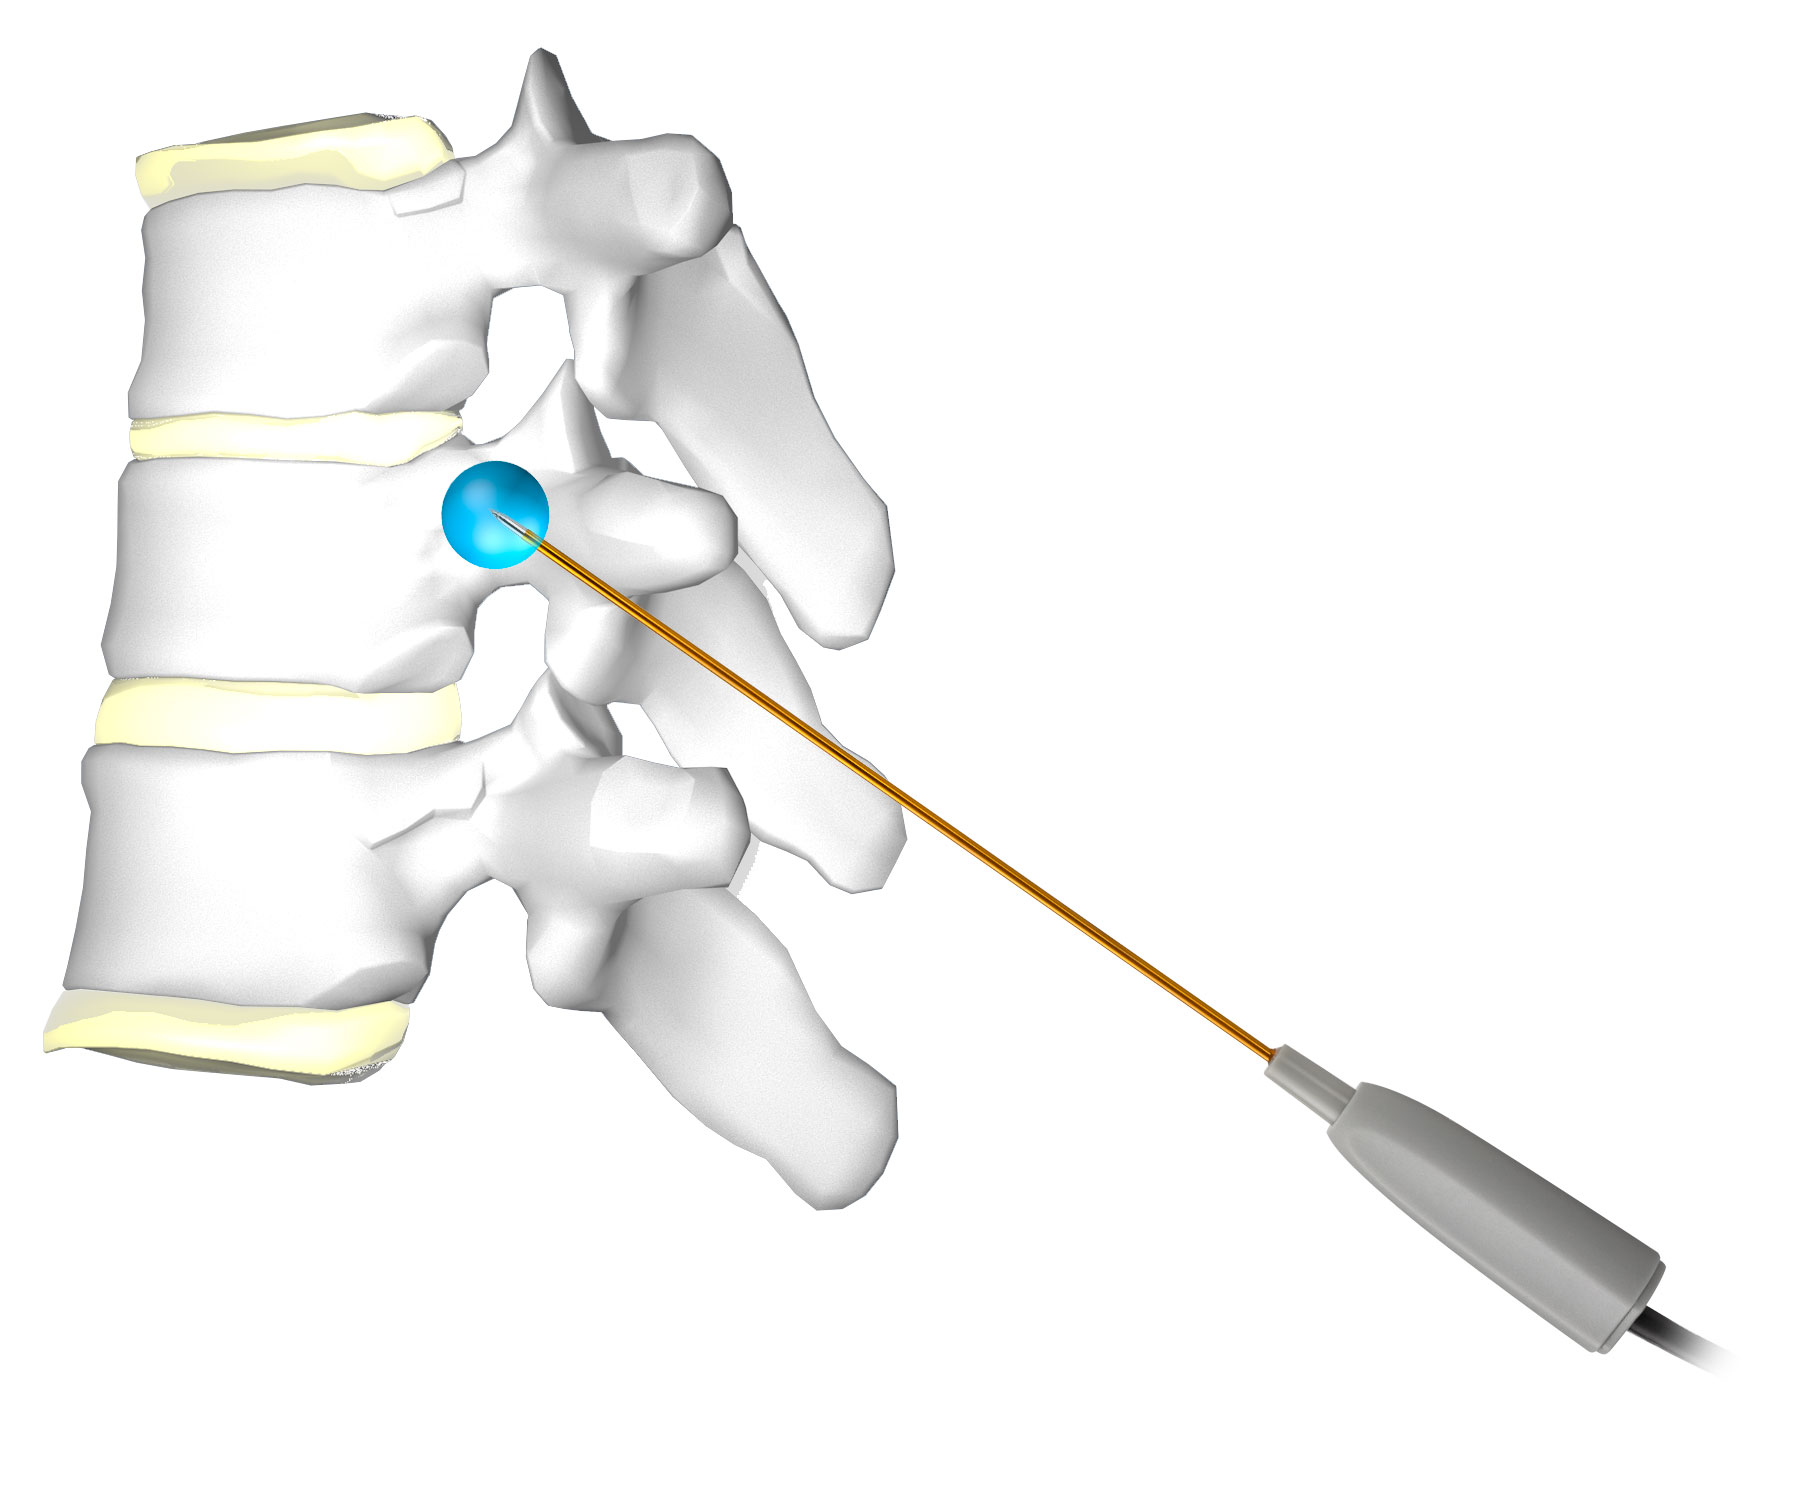 Accurian™ in thoracic spinal procedures